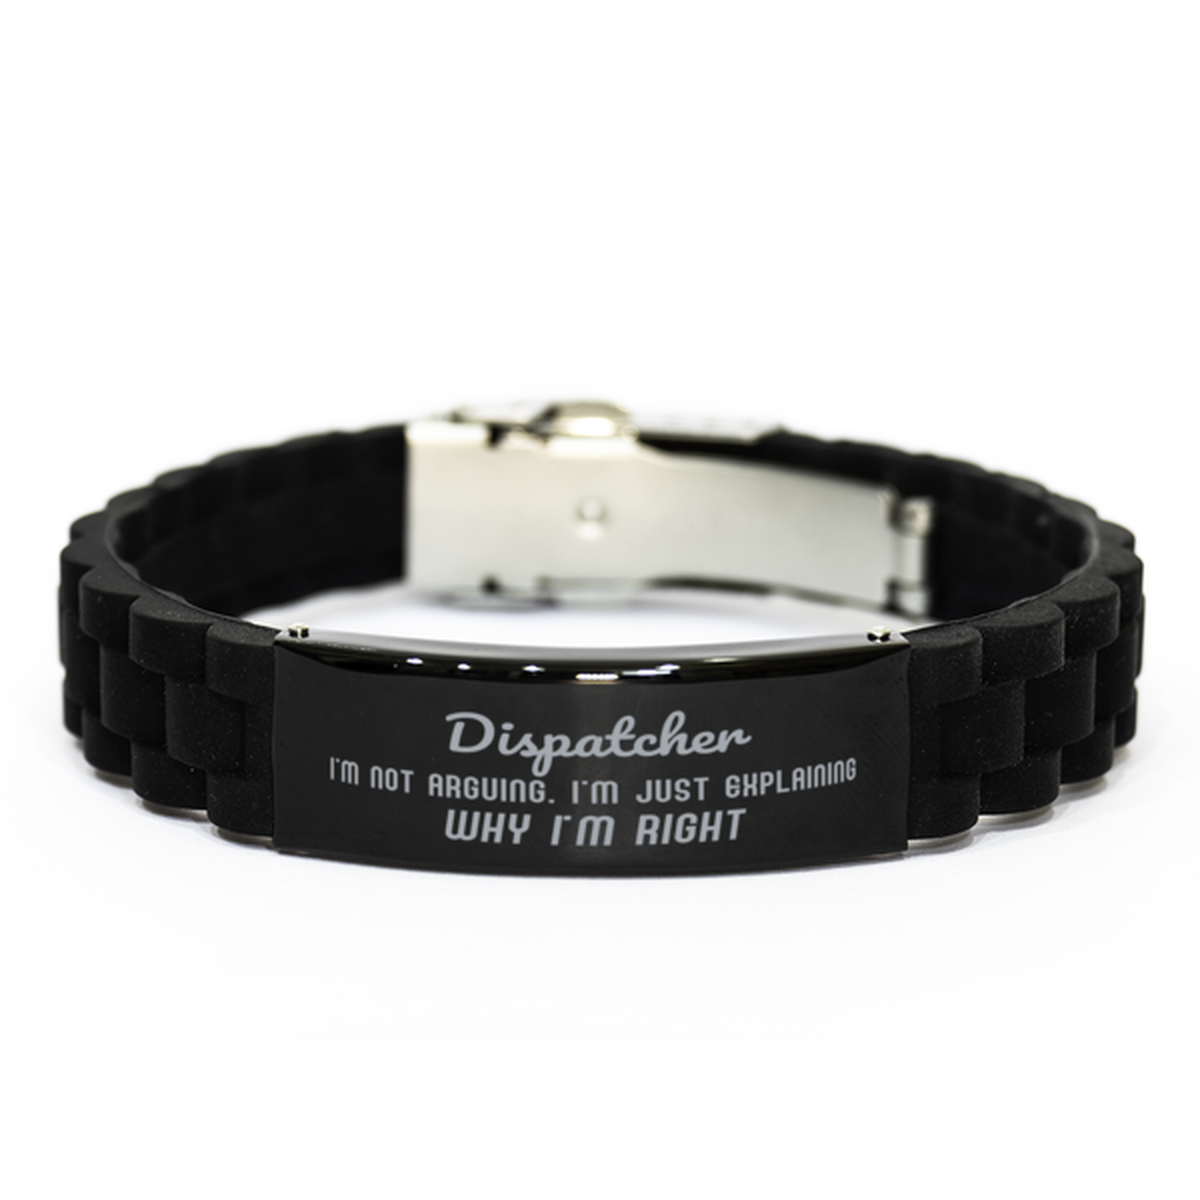 Dispatcher I'm not Arguing. I'm Just Explaining Why I'm RIGHT Black Glidelock Clasp Bracelet, Funny Saying Quote Dispatcher Gifts For Dispatcher Graduation Birthday Christmas Gifts for Men Women Coworker